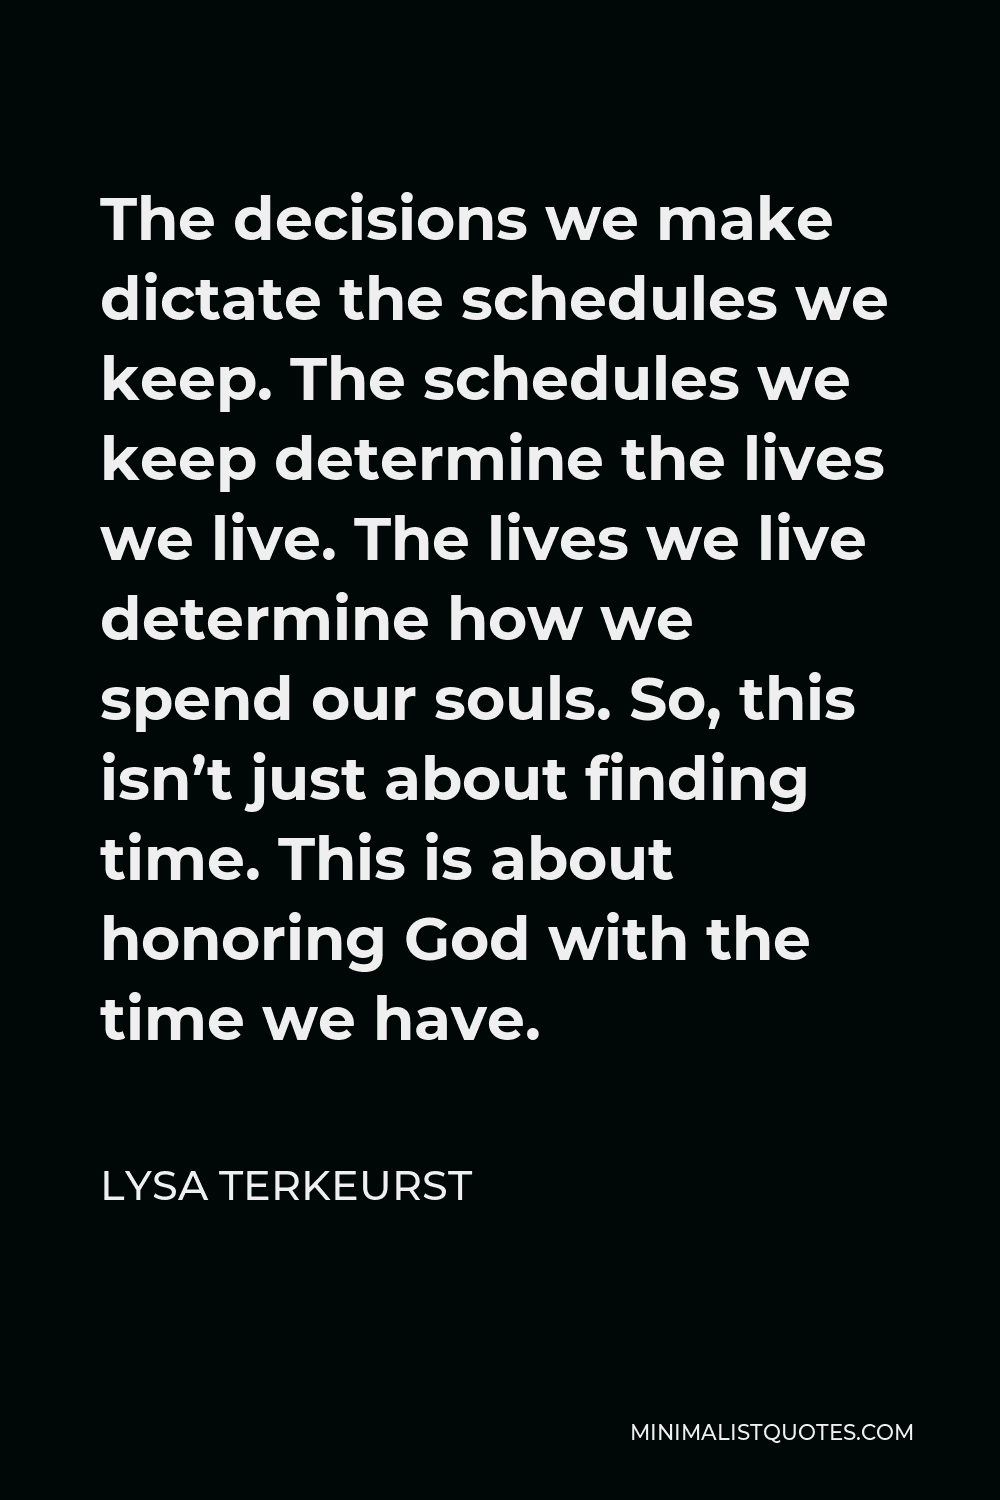 Lysa TerKeurst Quote - The decisions we make dictate the schedules we keep. The schedules we keep determine the lives we live. The lives we live determine how we spend our souls. So, this isn’t just about finding time. This is about honoring God with the time we have.